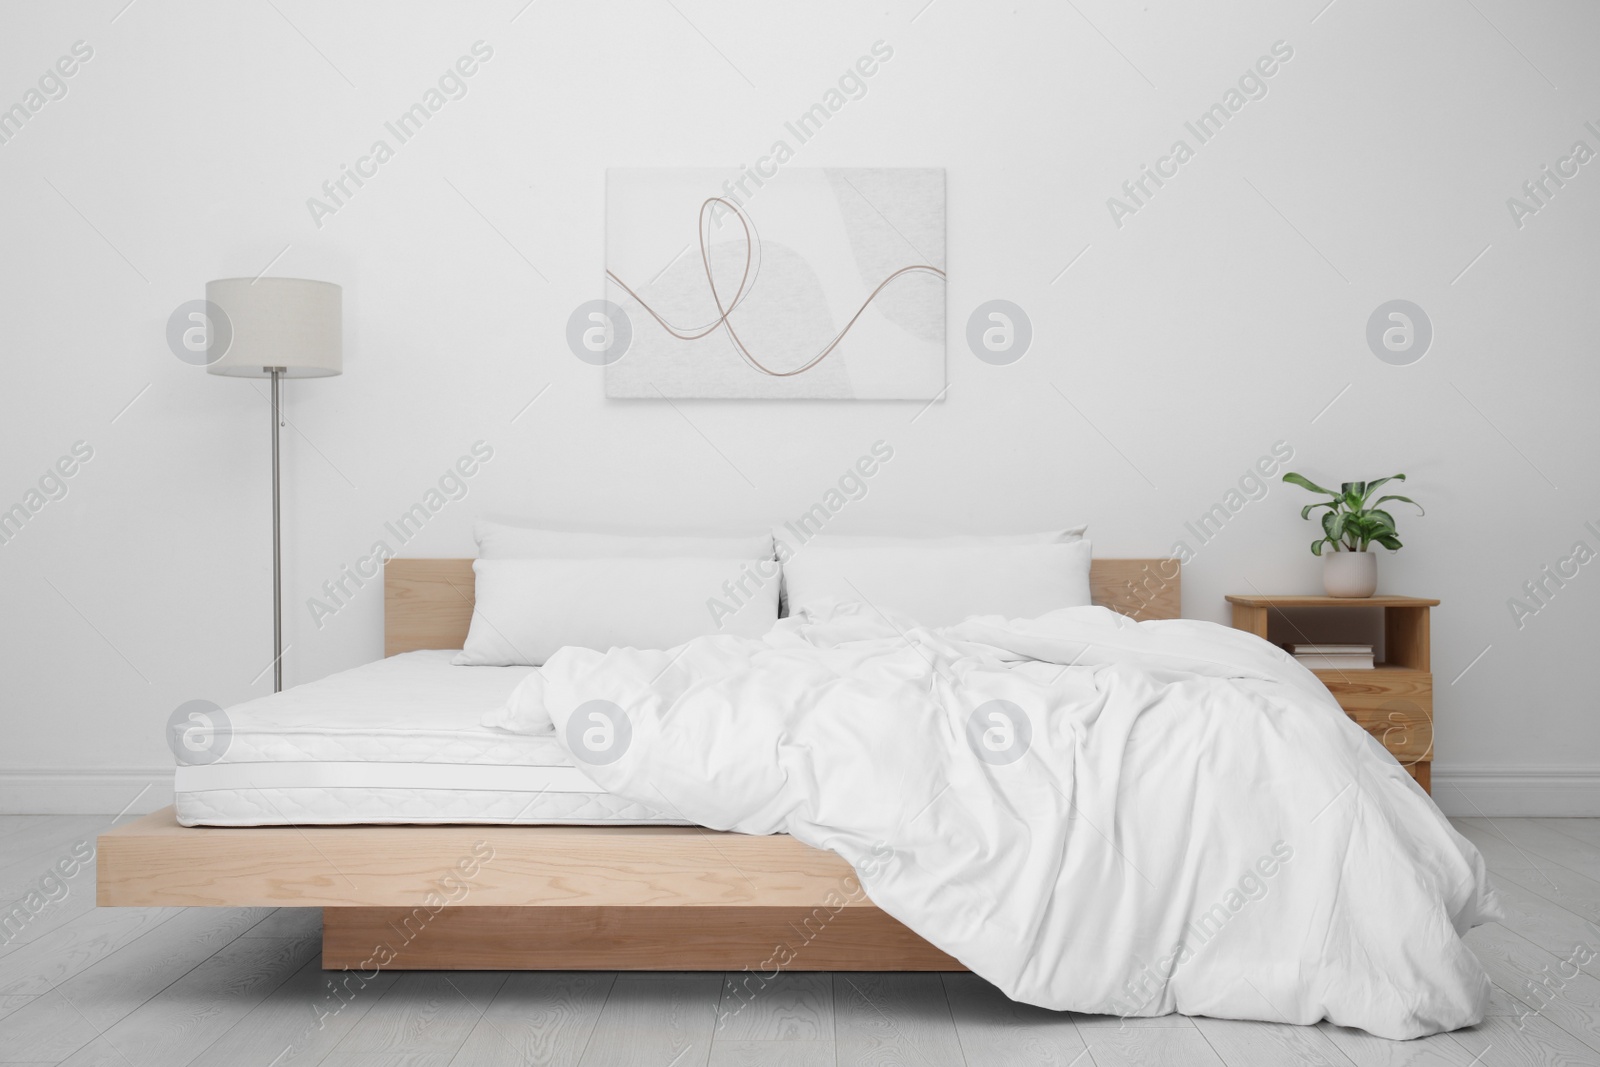 Photo of Wooden bed with soft white mattress, blanket and pillows in cozy room interior